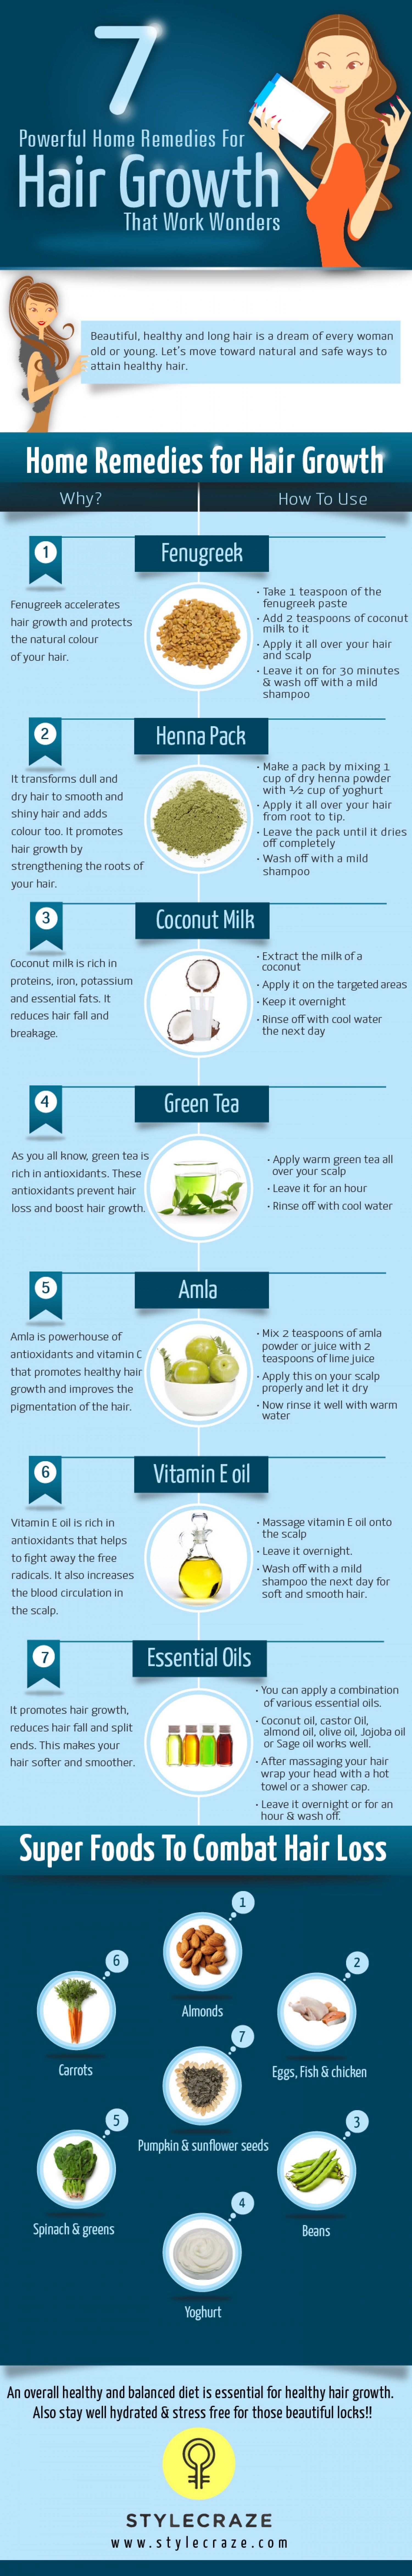 Hair Growth Remedies #infographic